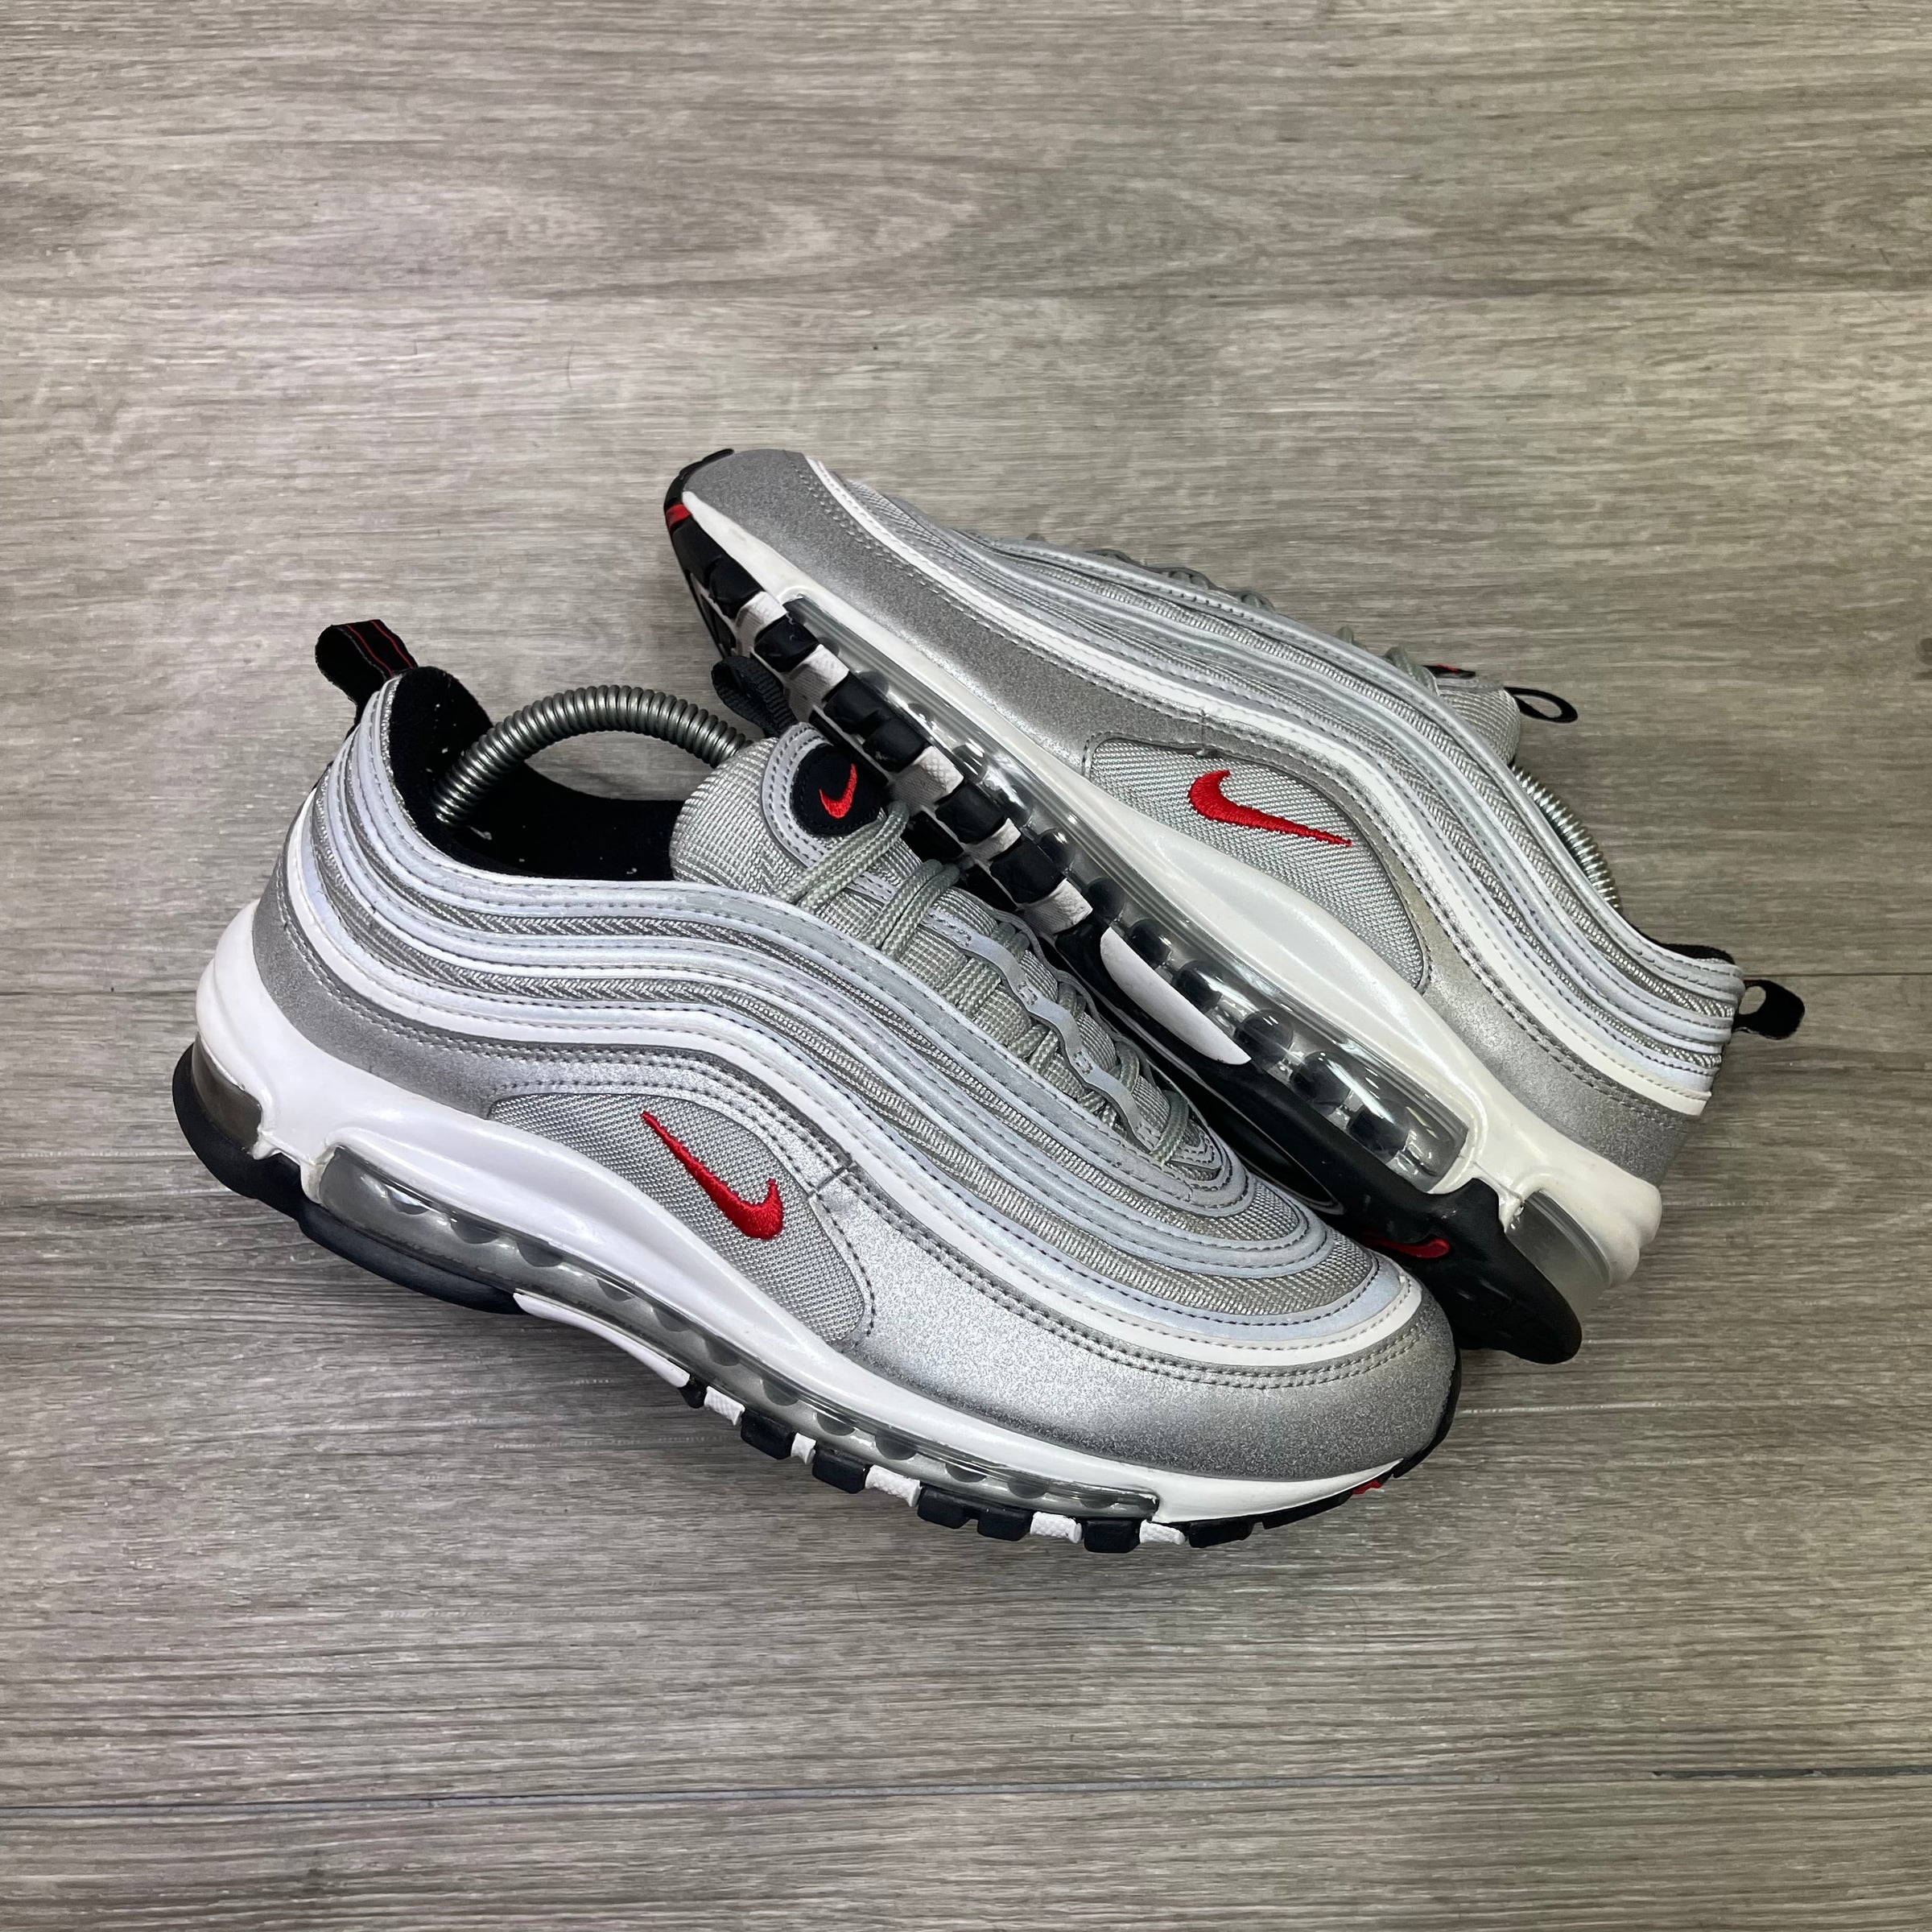 Bereiken referentie pijn doen Nike Air Max 97 Silver Bullet (2022) Size 8.5 Shoes Only $90 | Archived SF